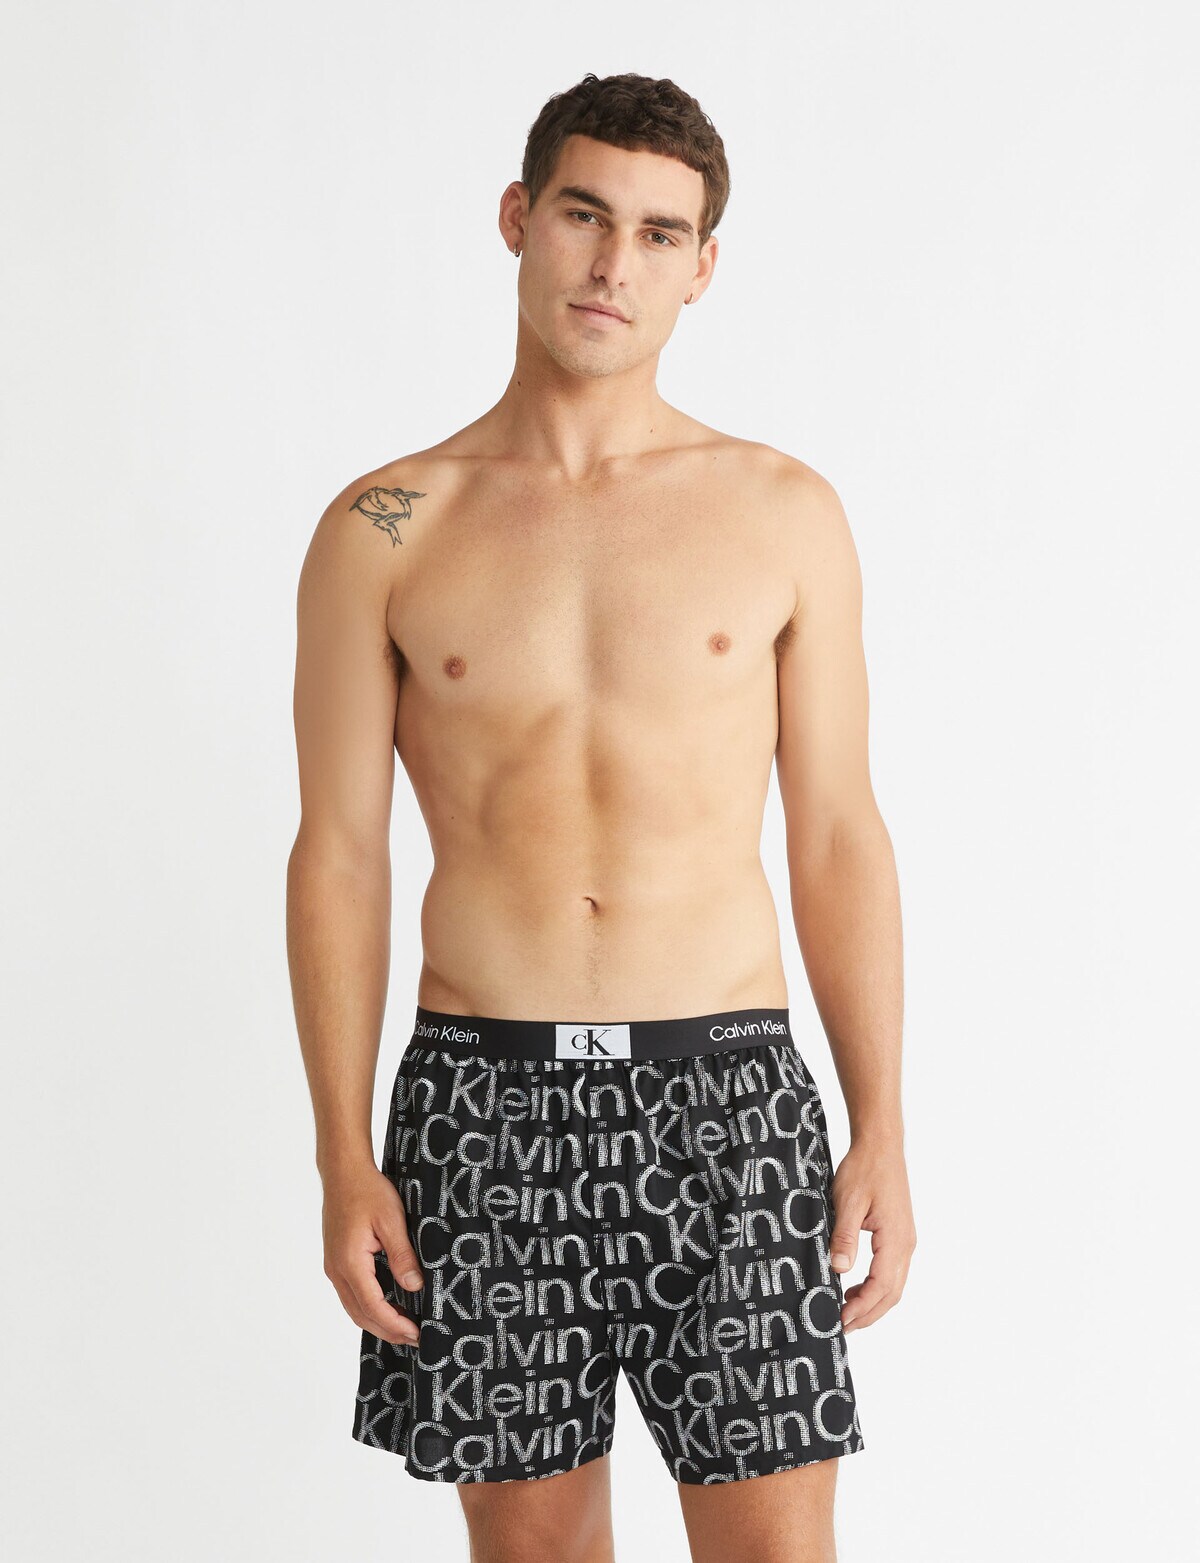 Stance Seeded Boxer Brief in Black